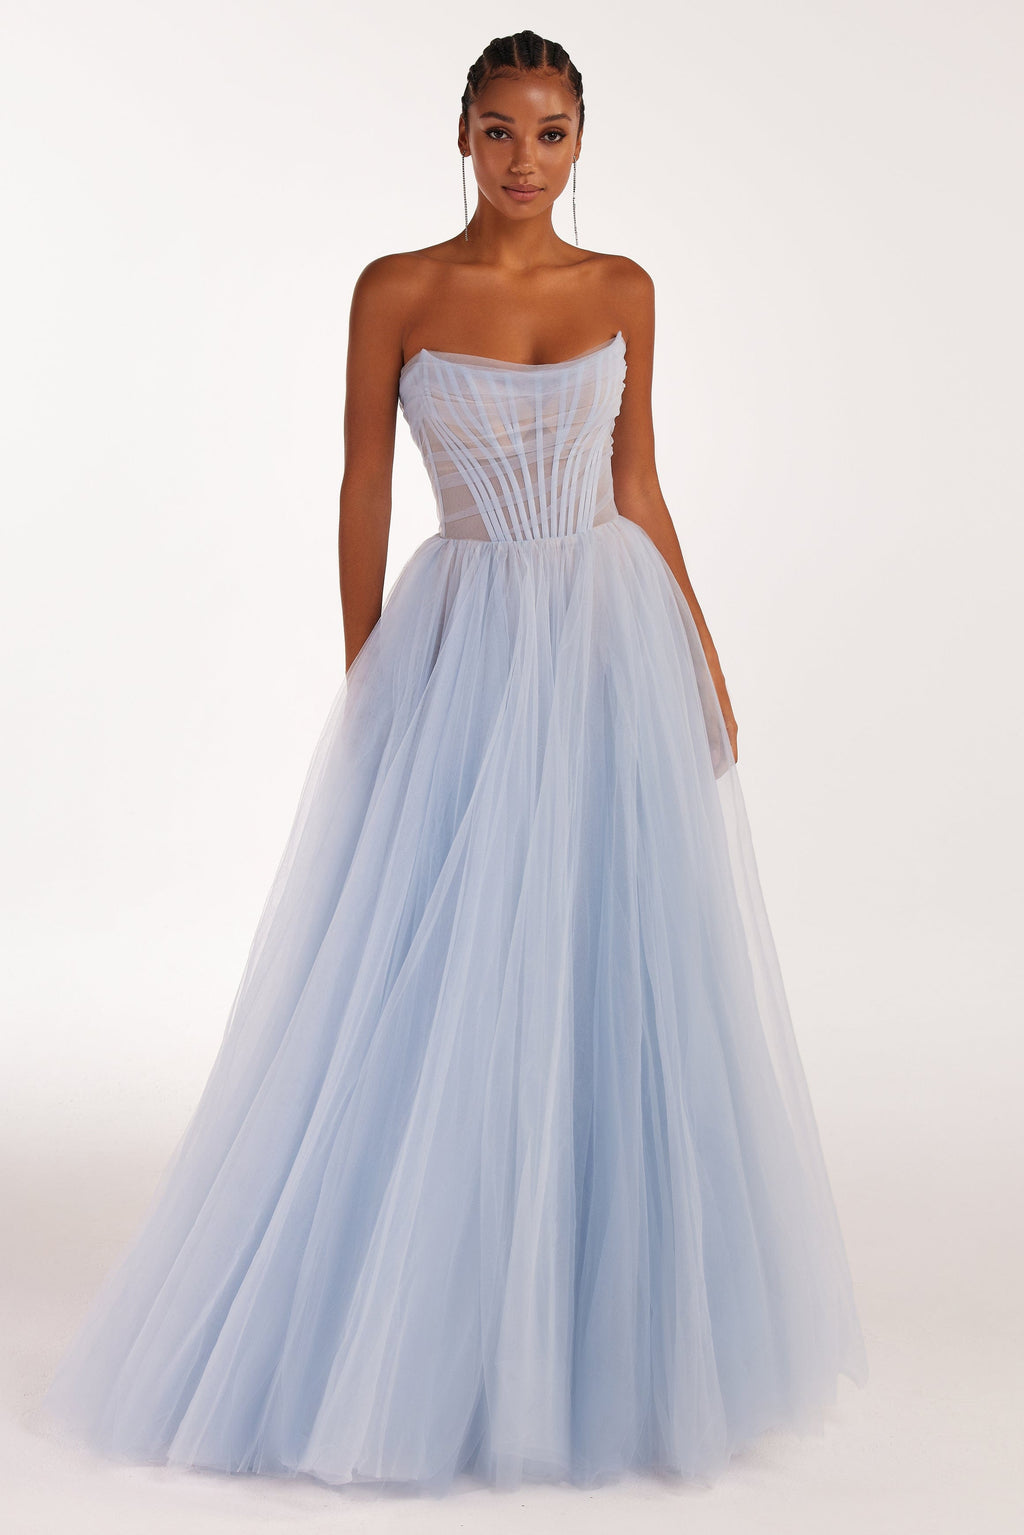 Light blue tulle dress with puffy sleeves